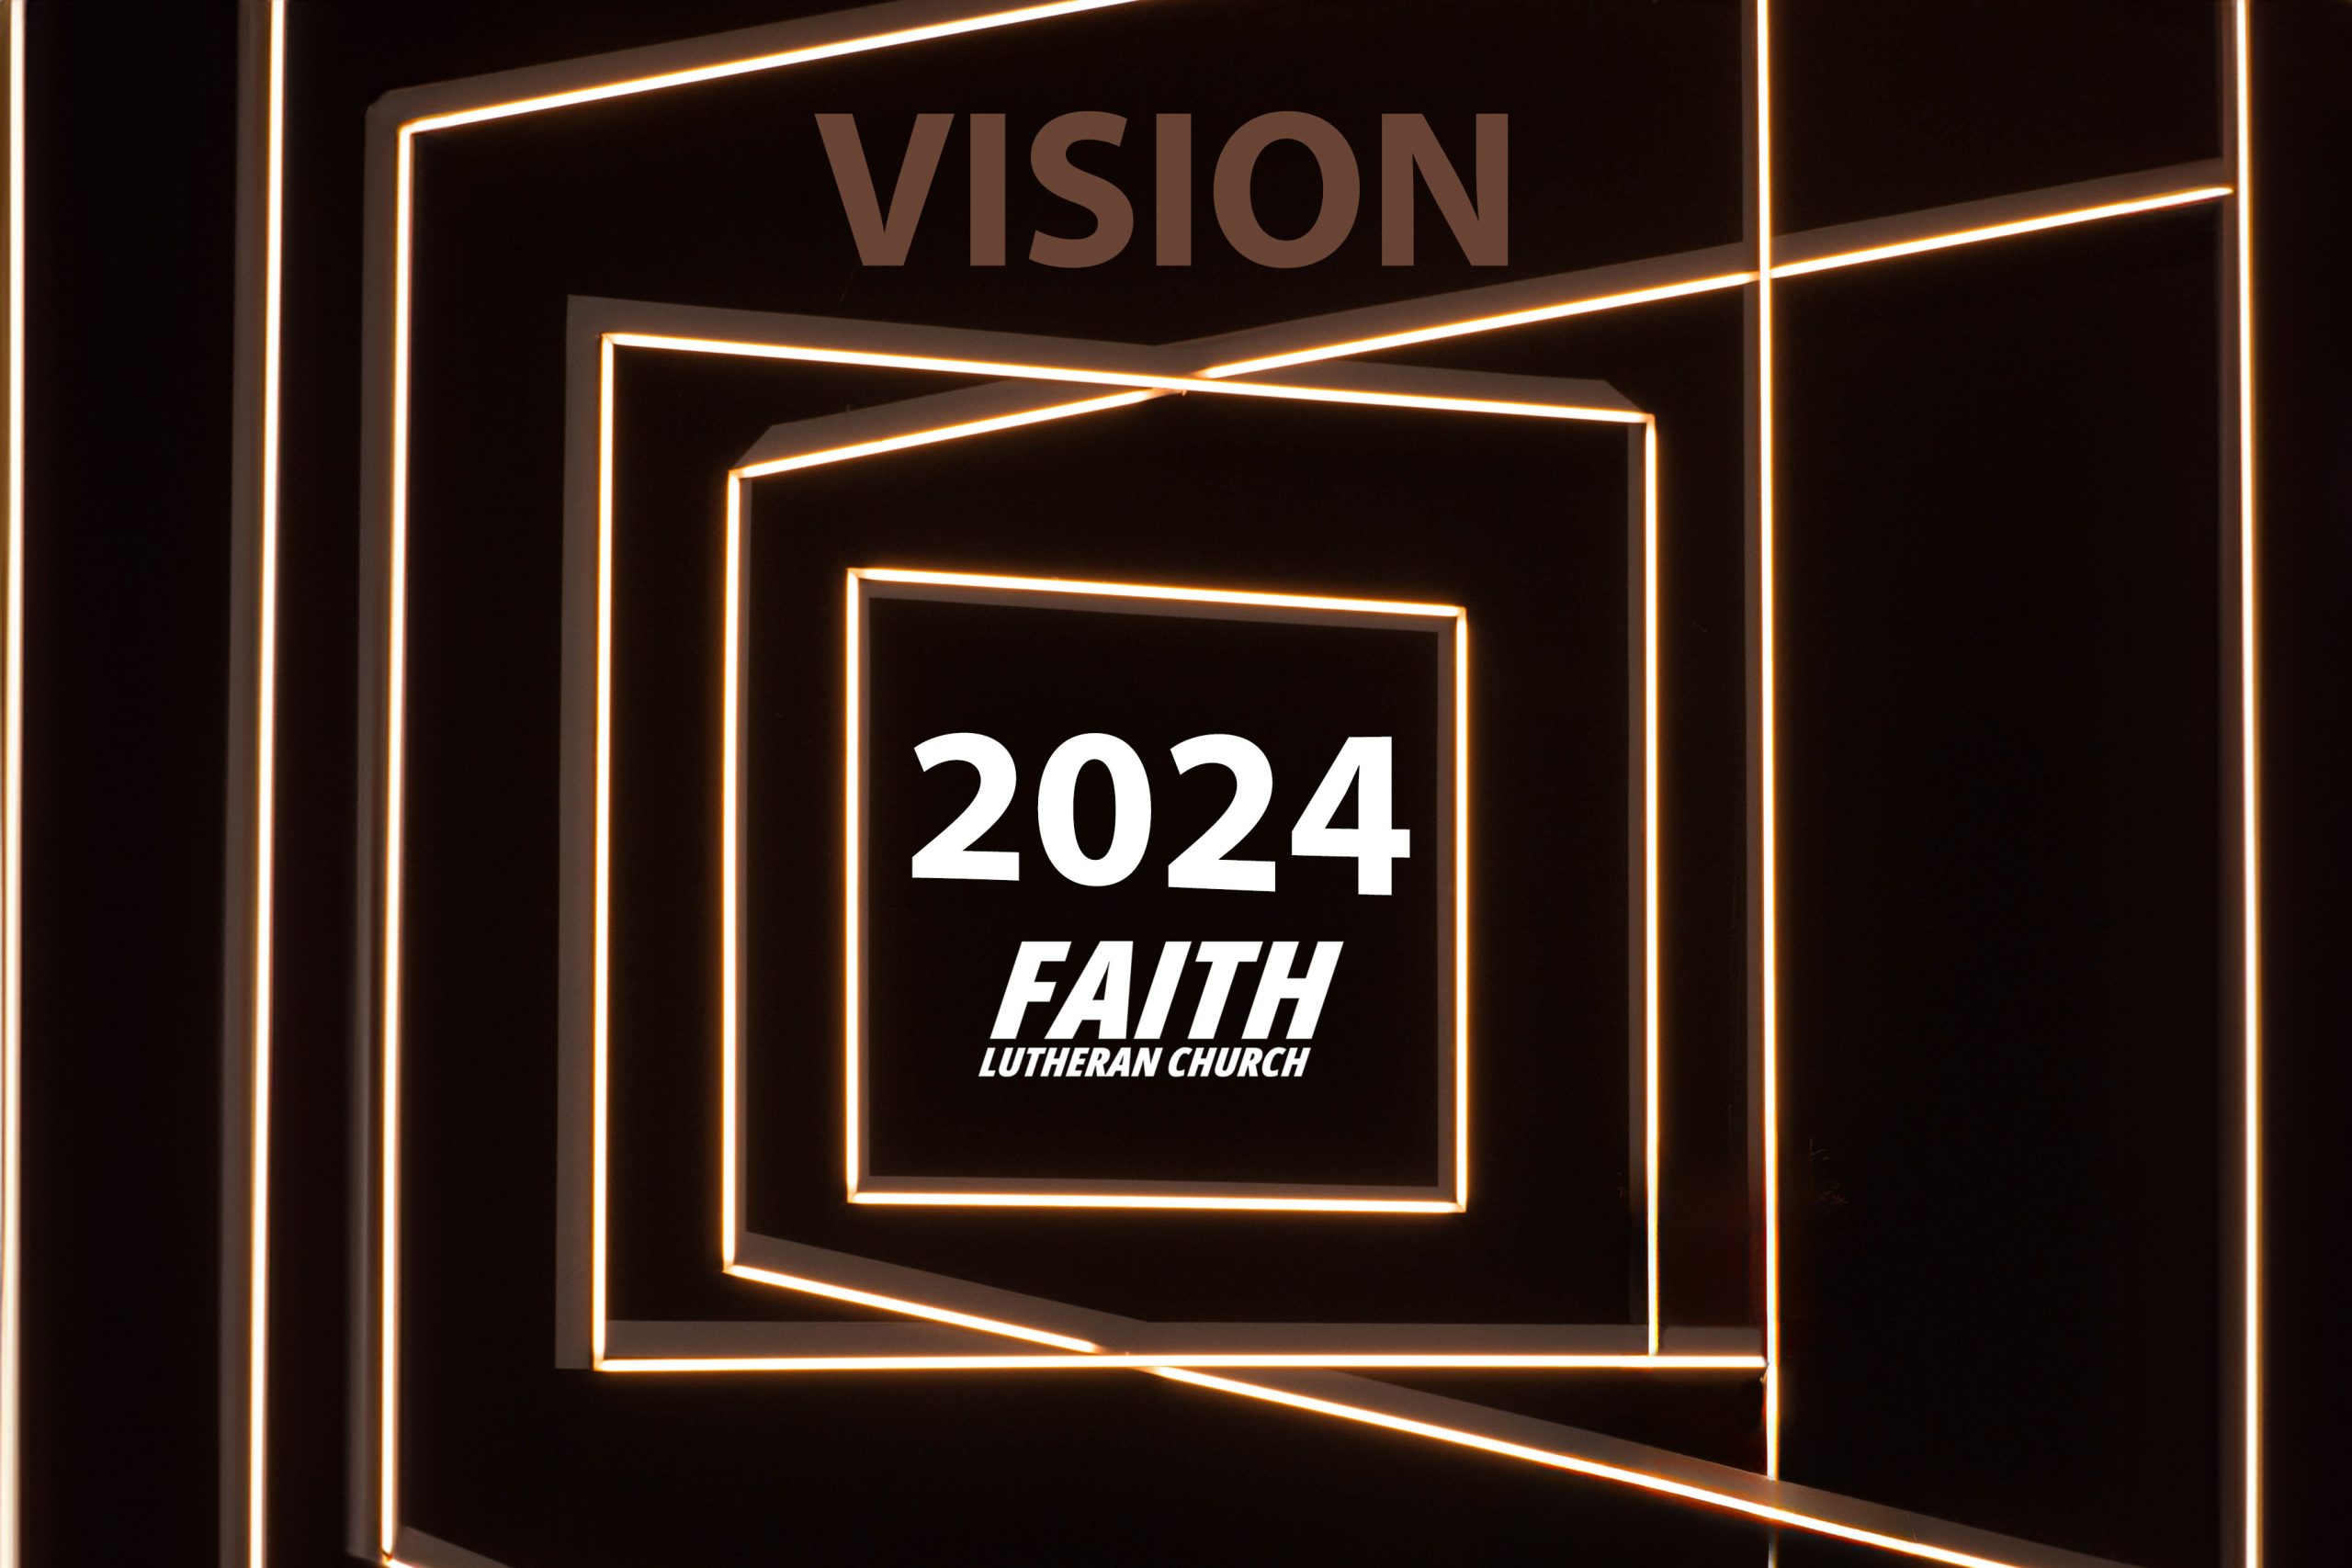 This Sunday is Vision Sunday at Faith Lutheran Church of McLean County